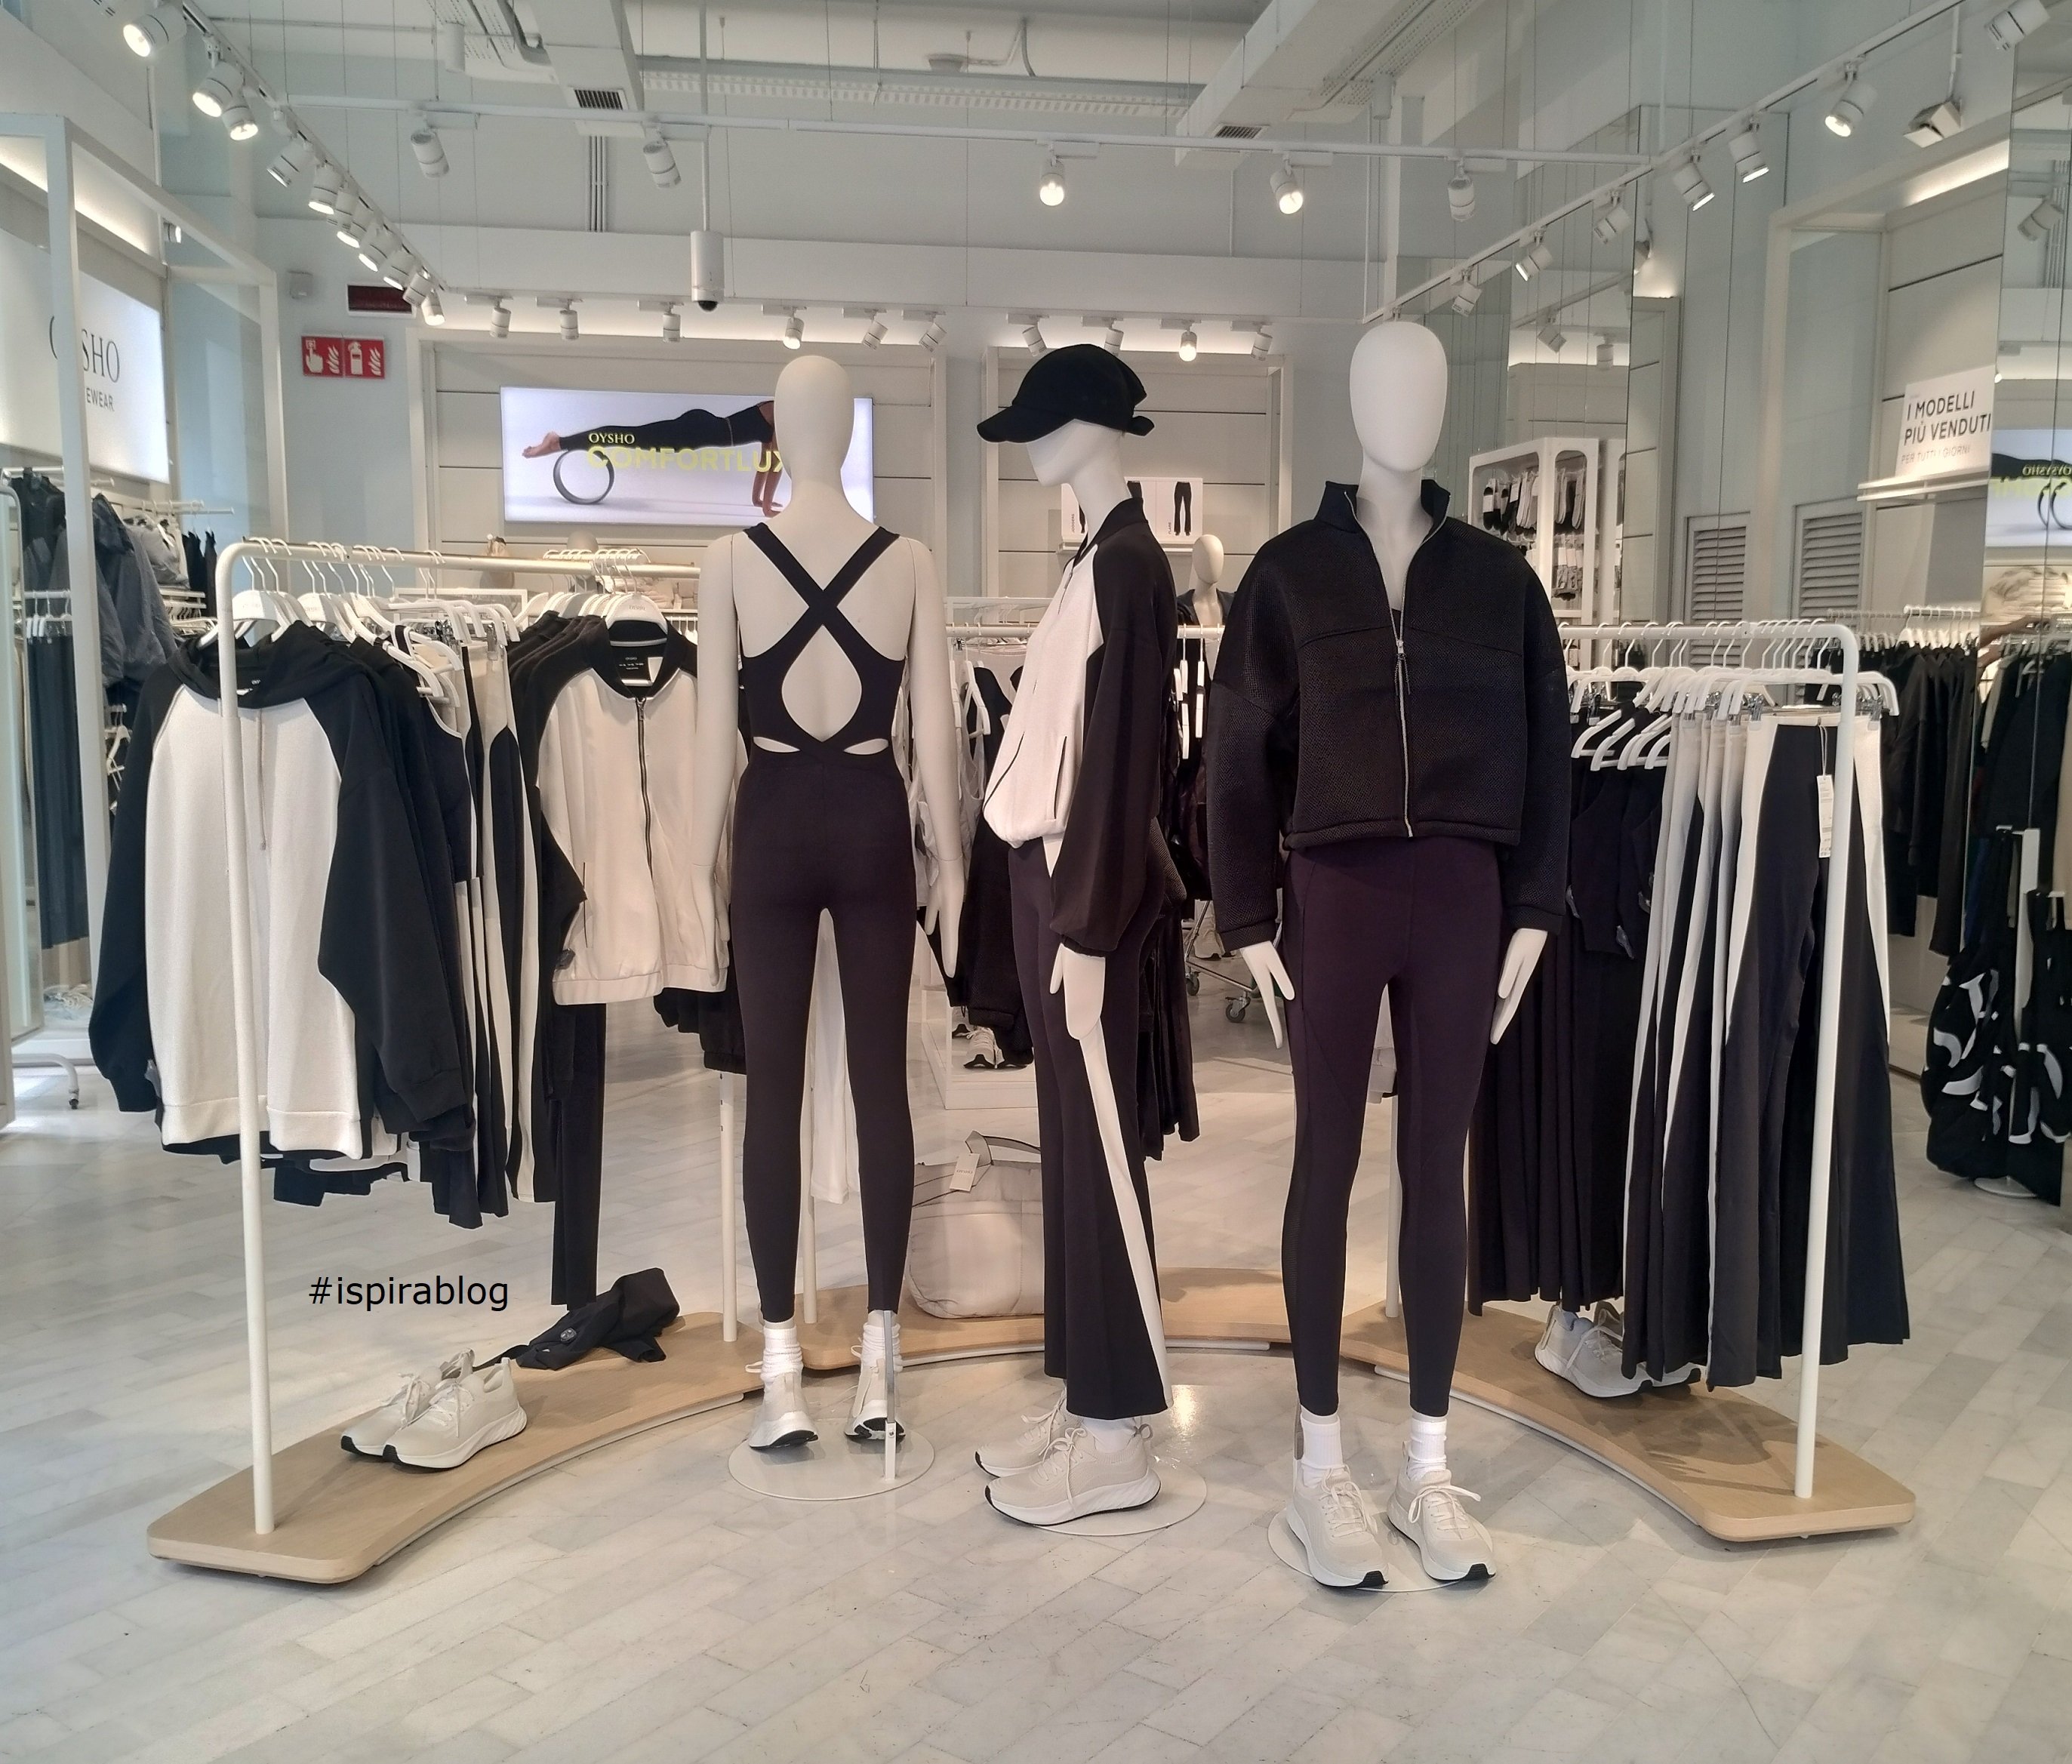 Ray Ray, Retail therapy at @oysho 🛍️ Their first activewear in the Middle  East - #ootd #ootdfashion #retail #retailtherapy #shopping #oysho